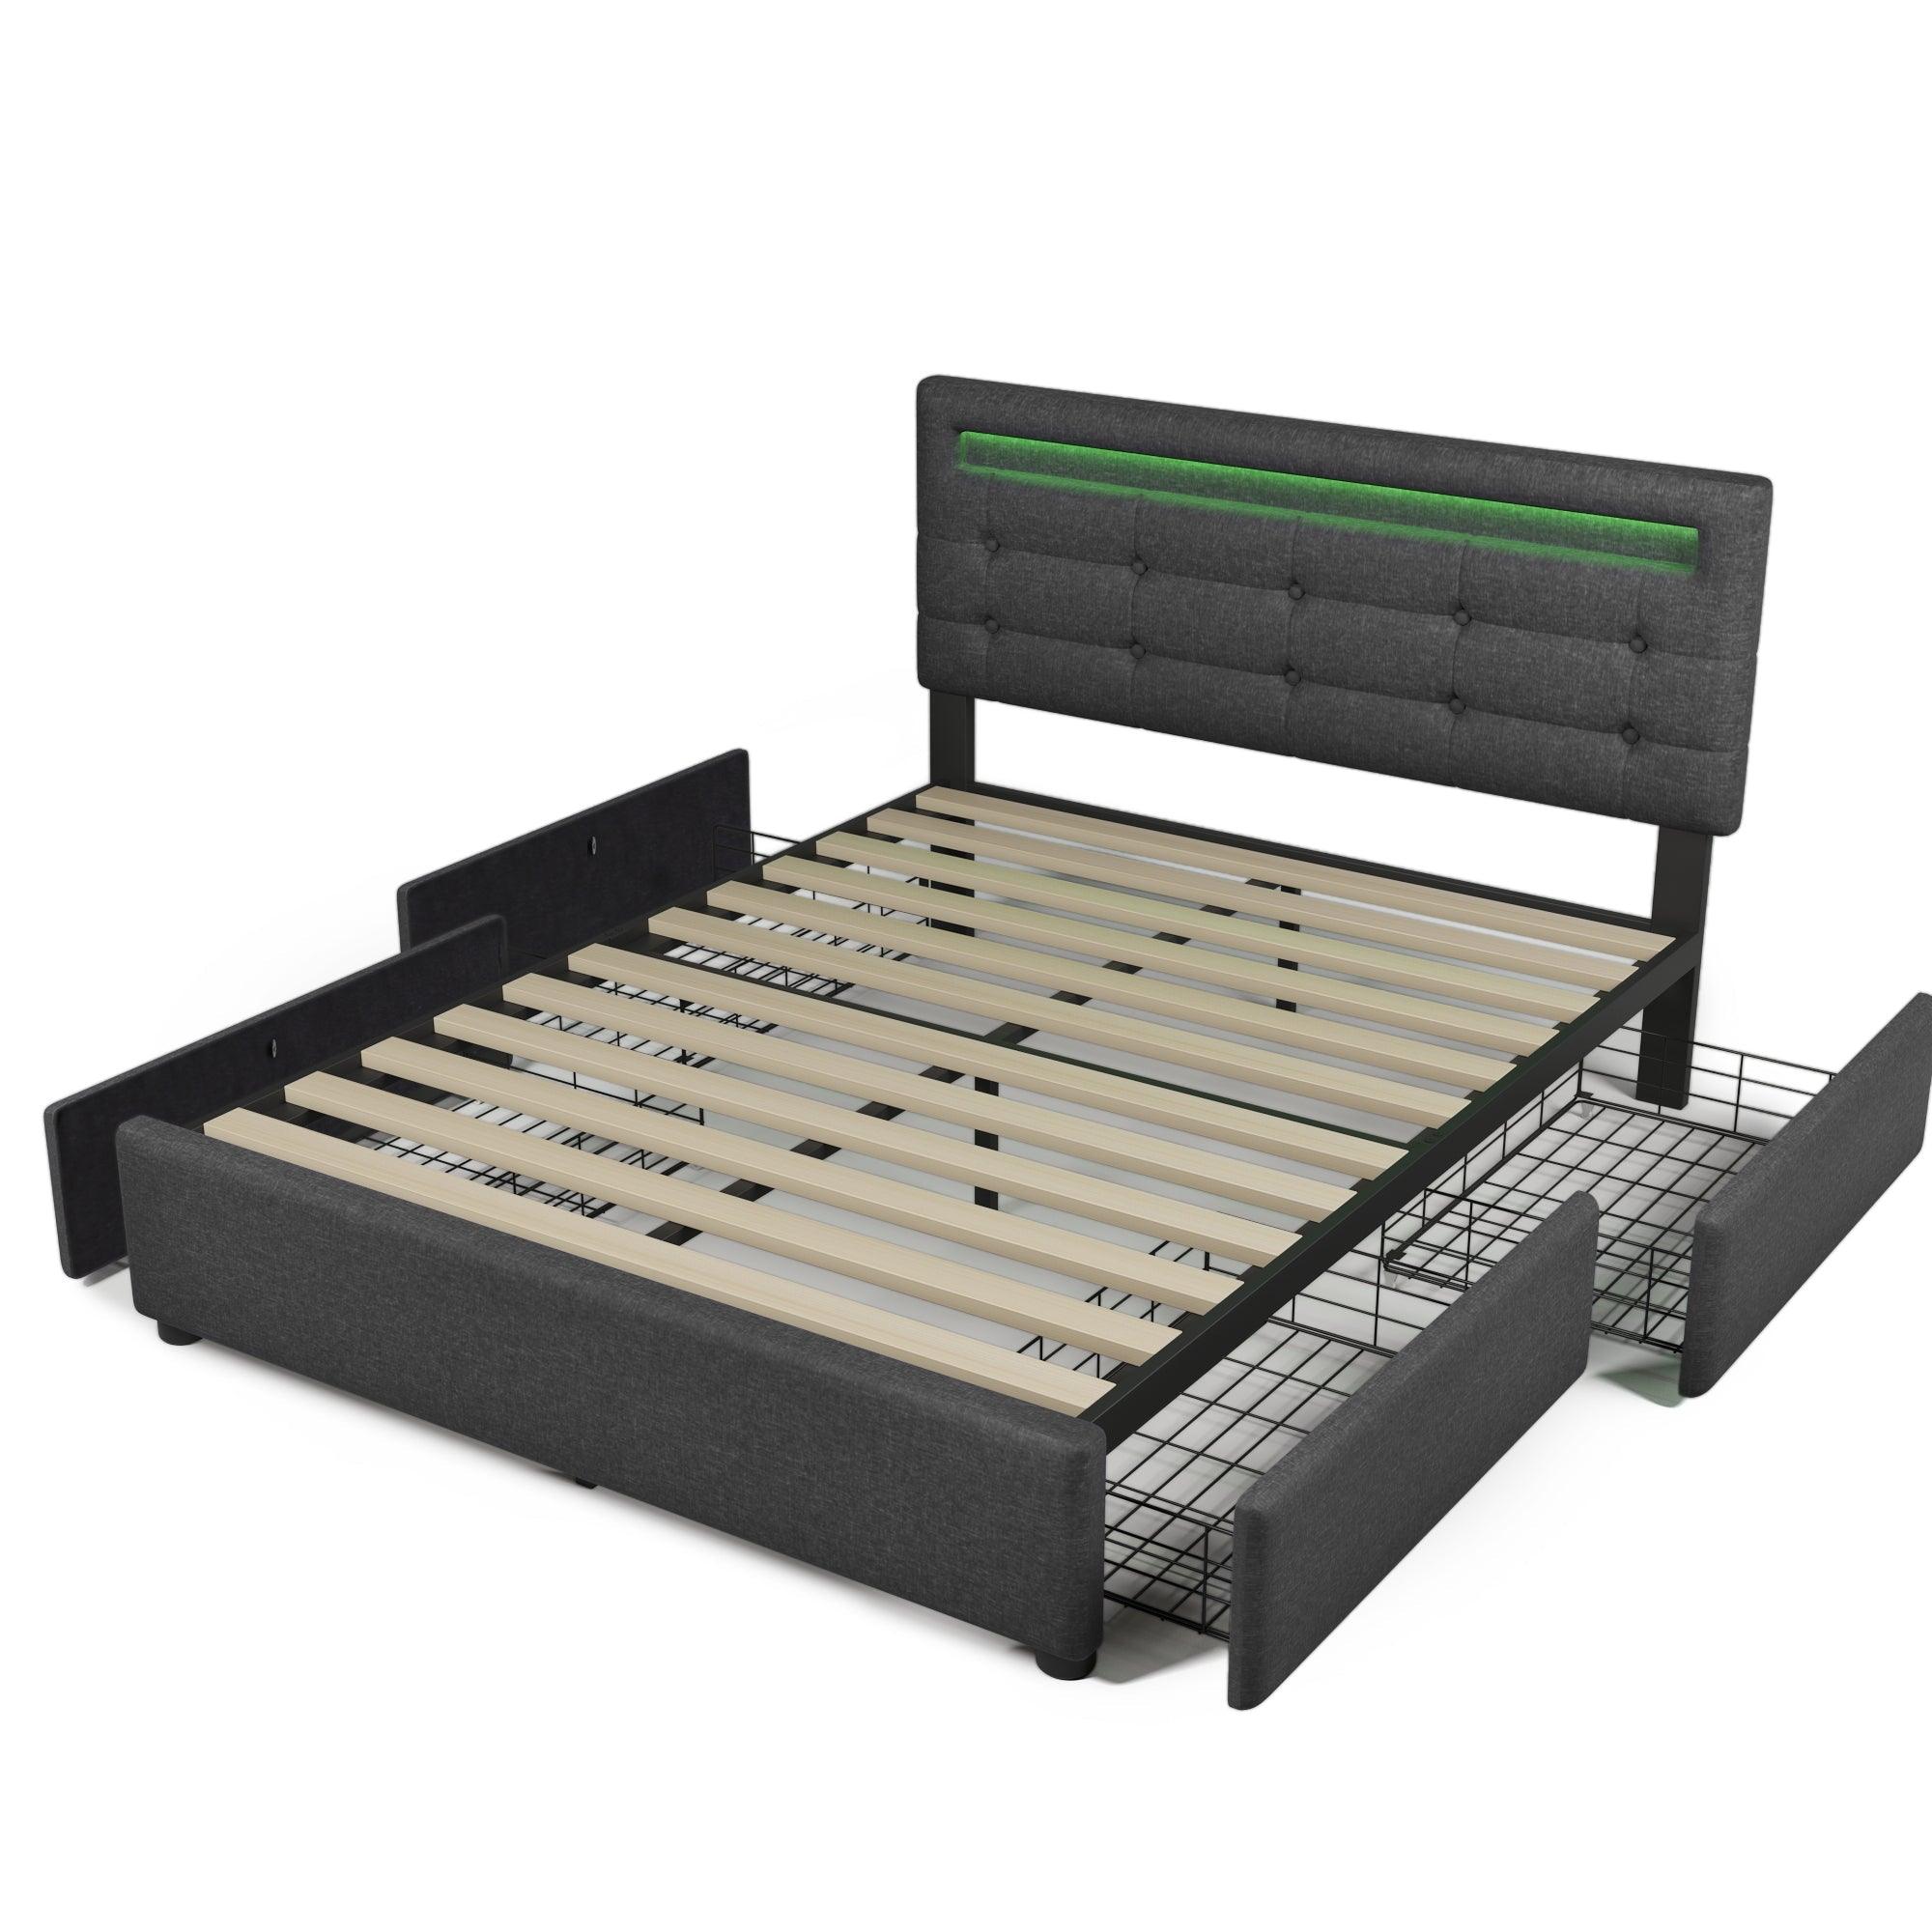 Bed Frame Queen Size, Upholstered Platform Bed Frame with 4 Storage Drawers and LED Lights & Adjustable Headboard, Gray LamCham